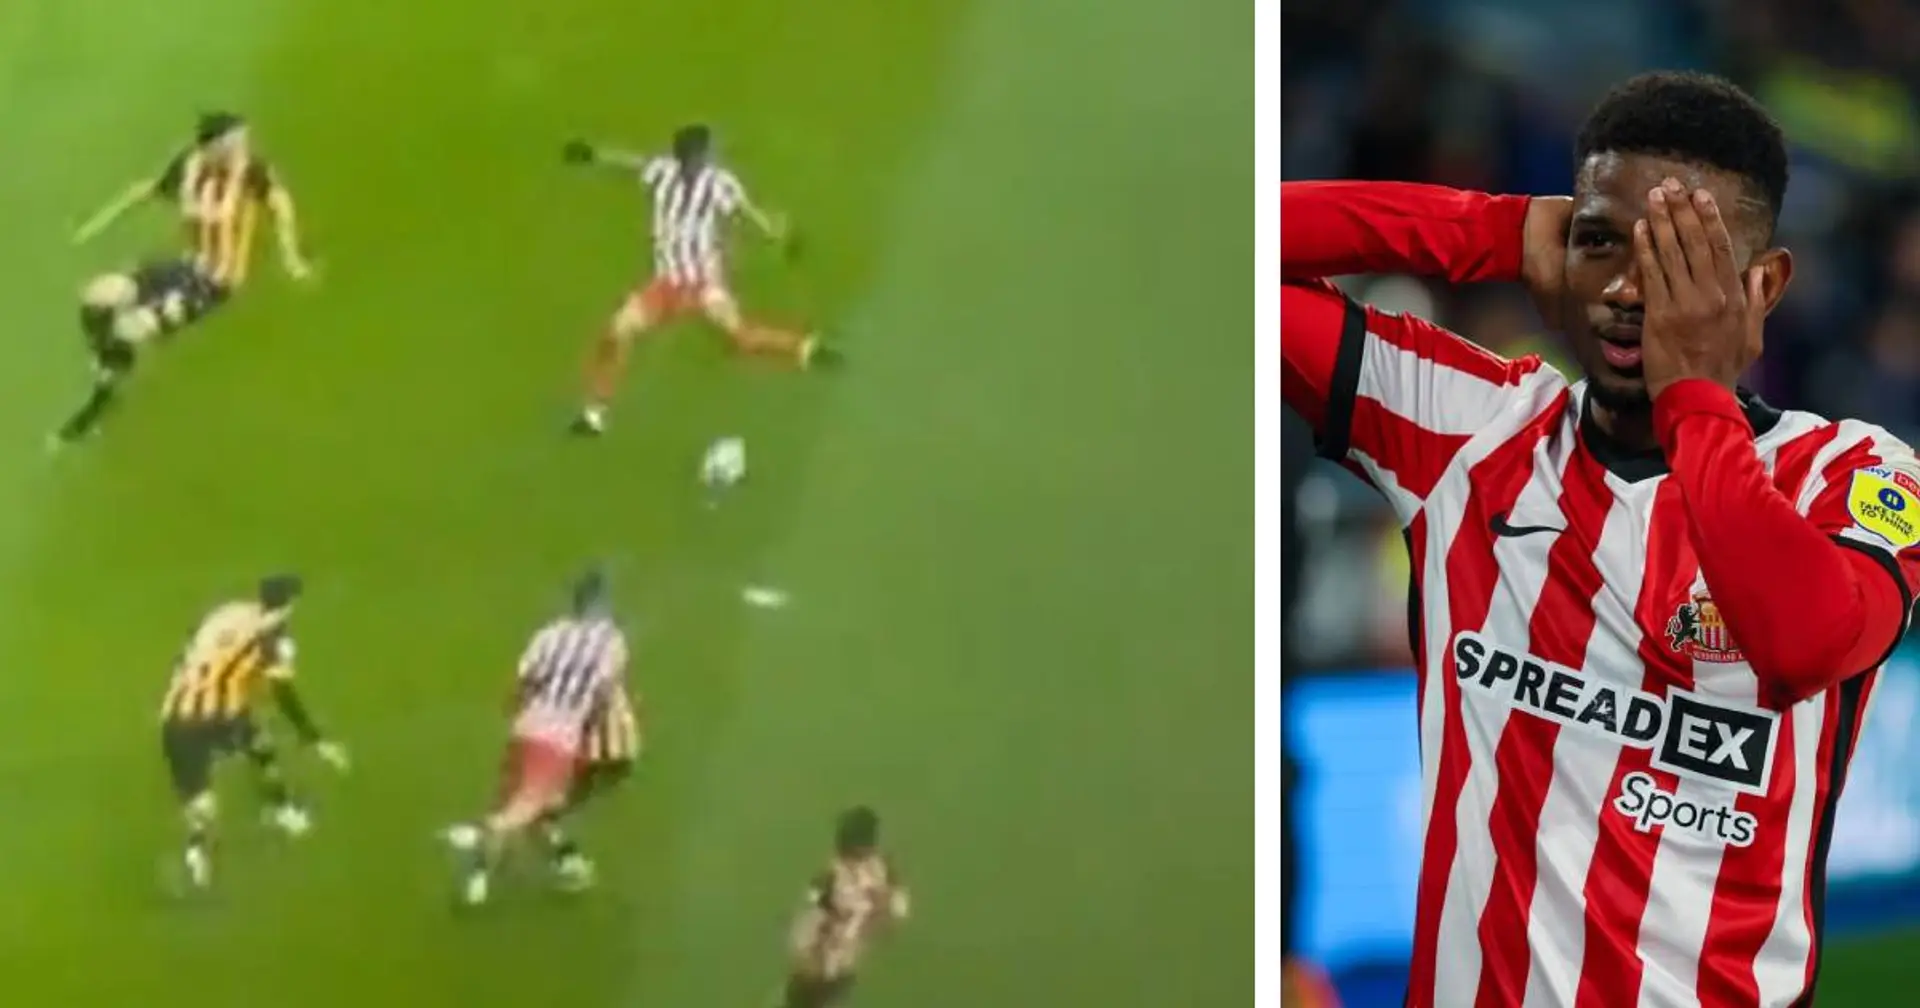 Amad Diallo scores his 10th goal for Sunderland — Man United fans can't keep calm